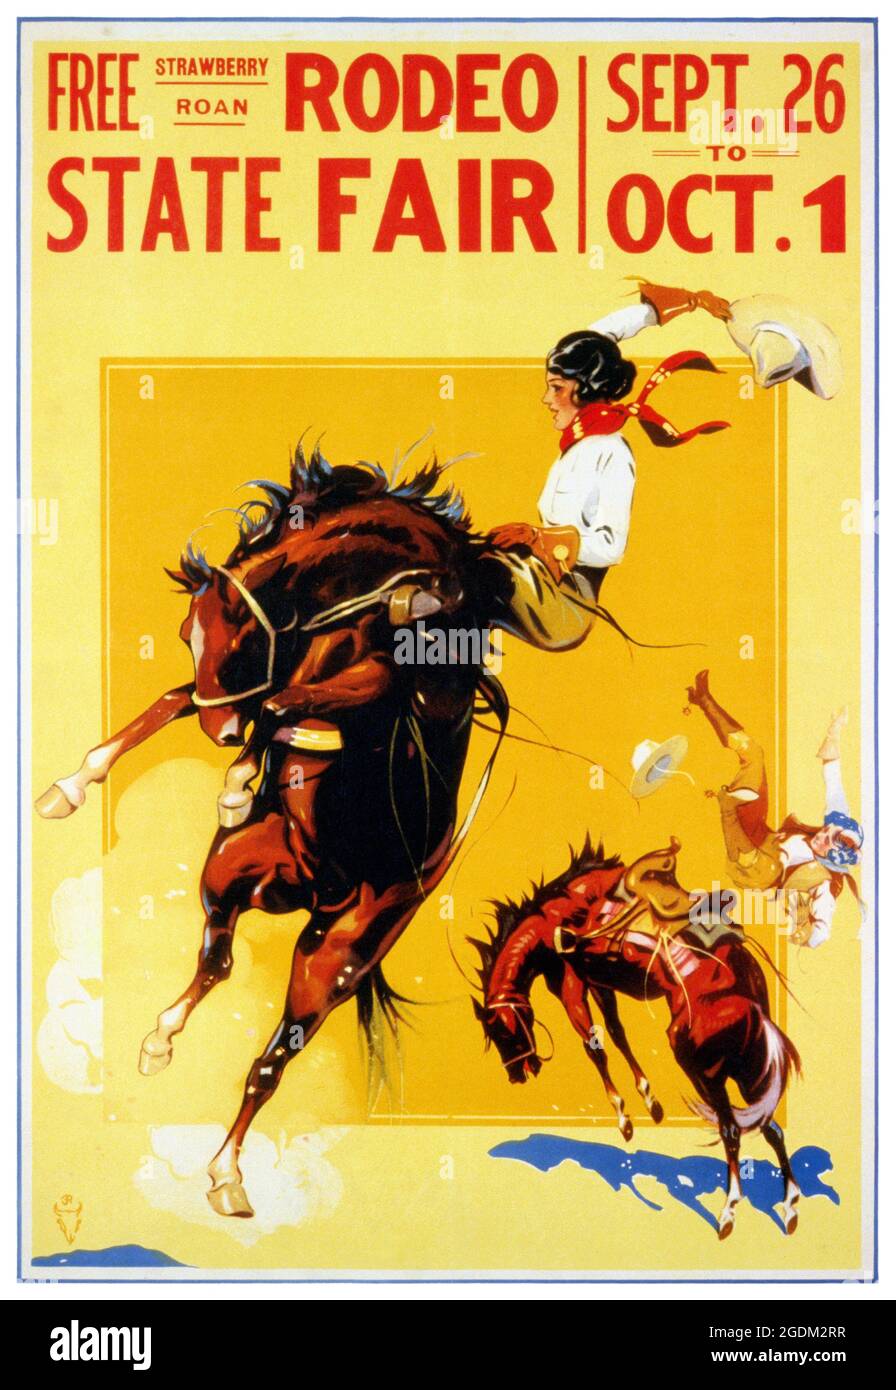 Free Strawberry Roan Rodeo State Fair by  Donaldson Litho. Co. Restored vintage poster published in the 1930s in the USA. Stock Photo